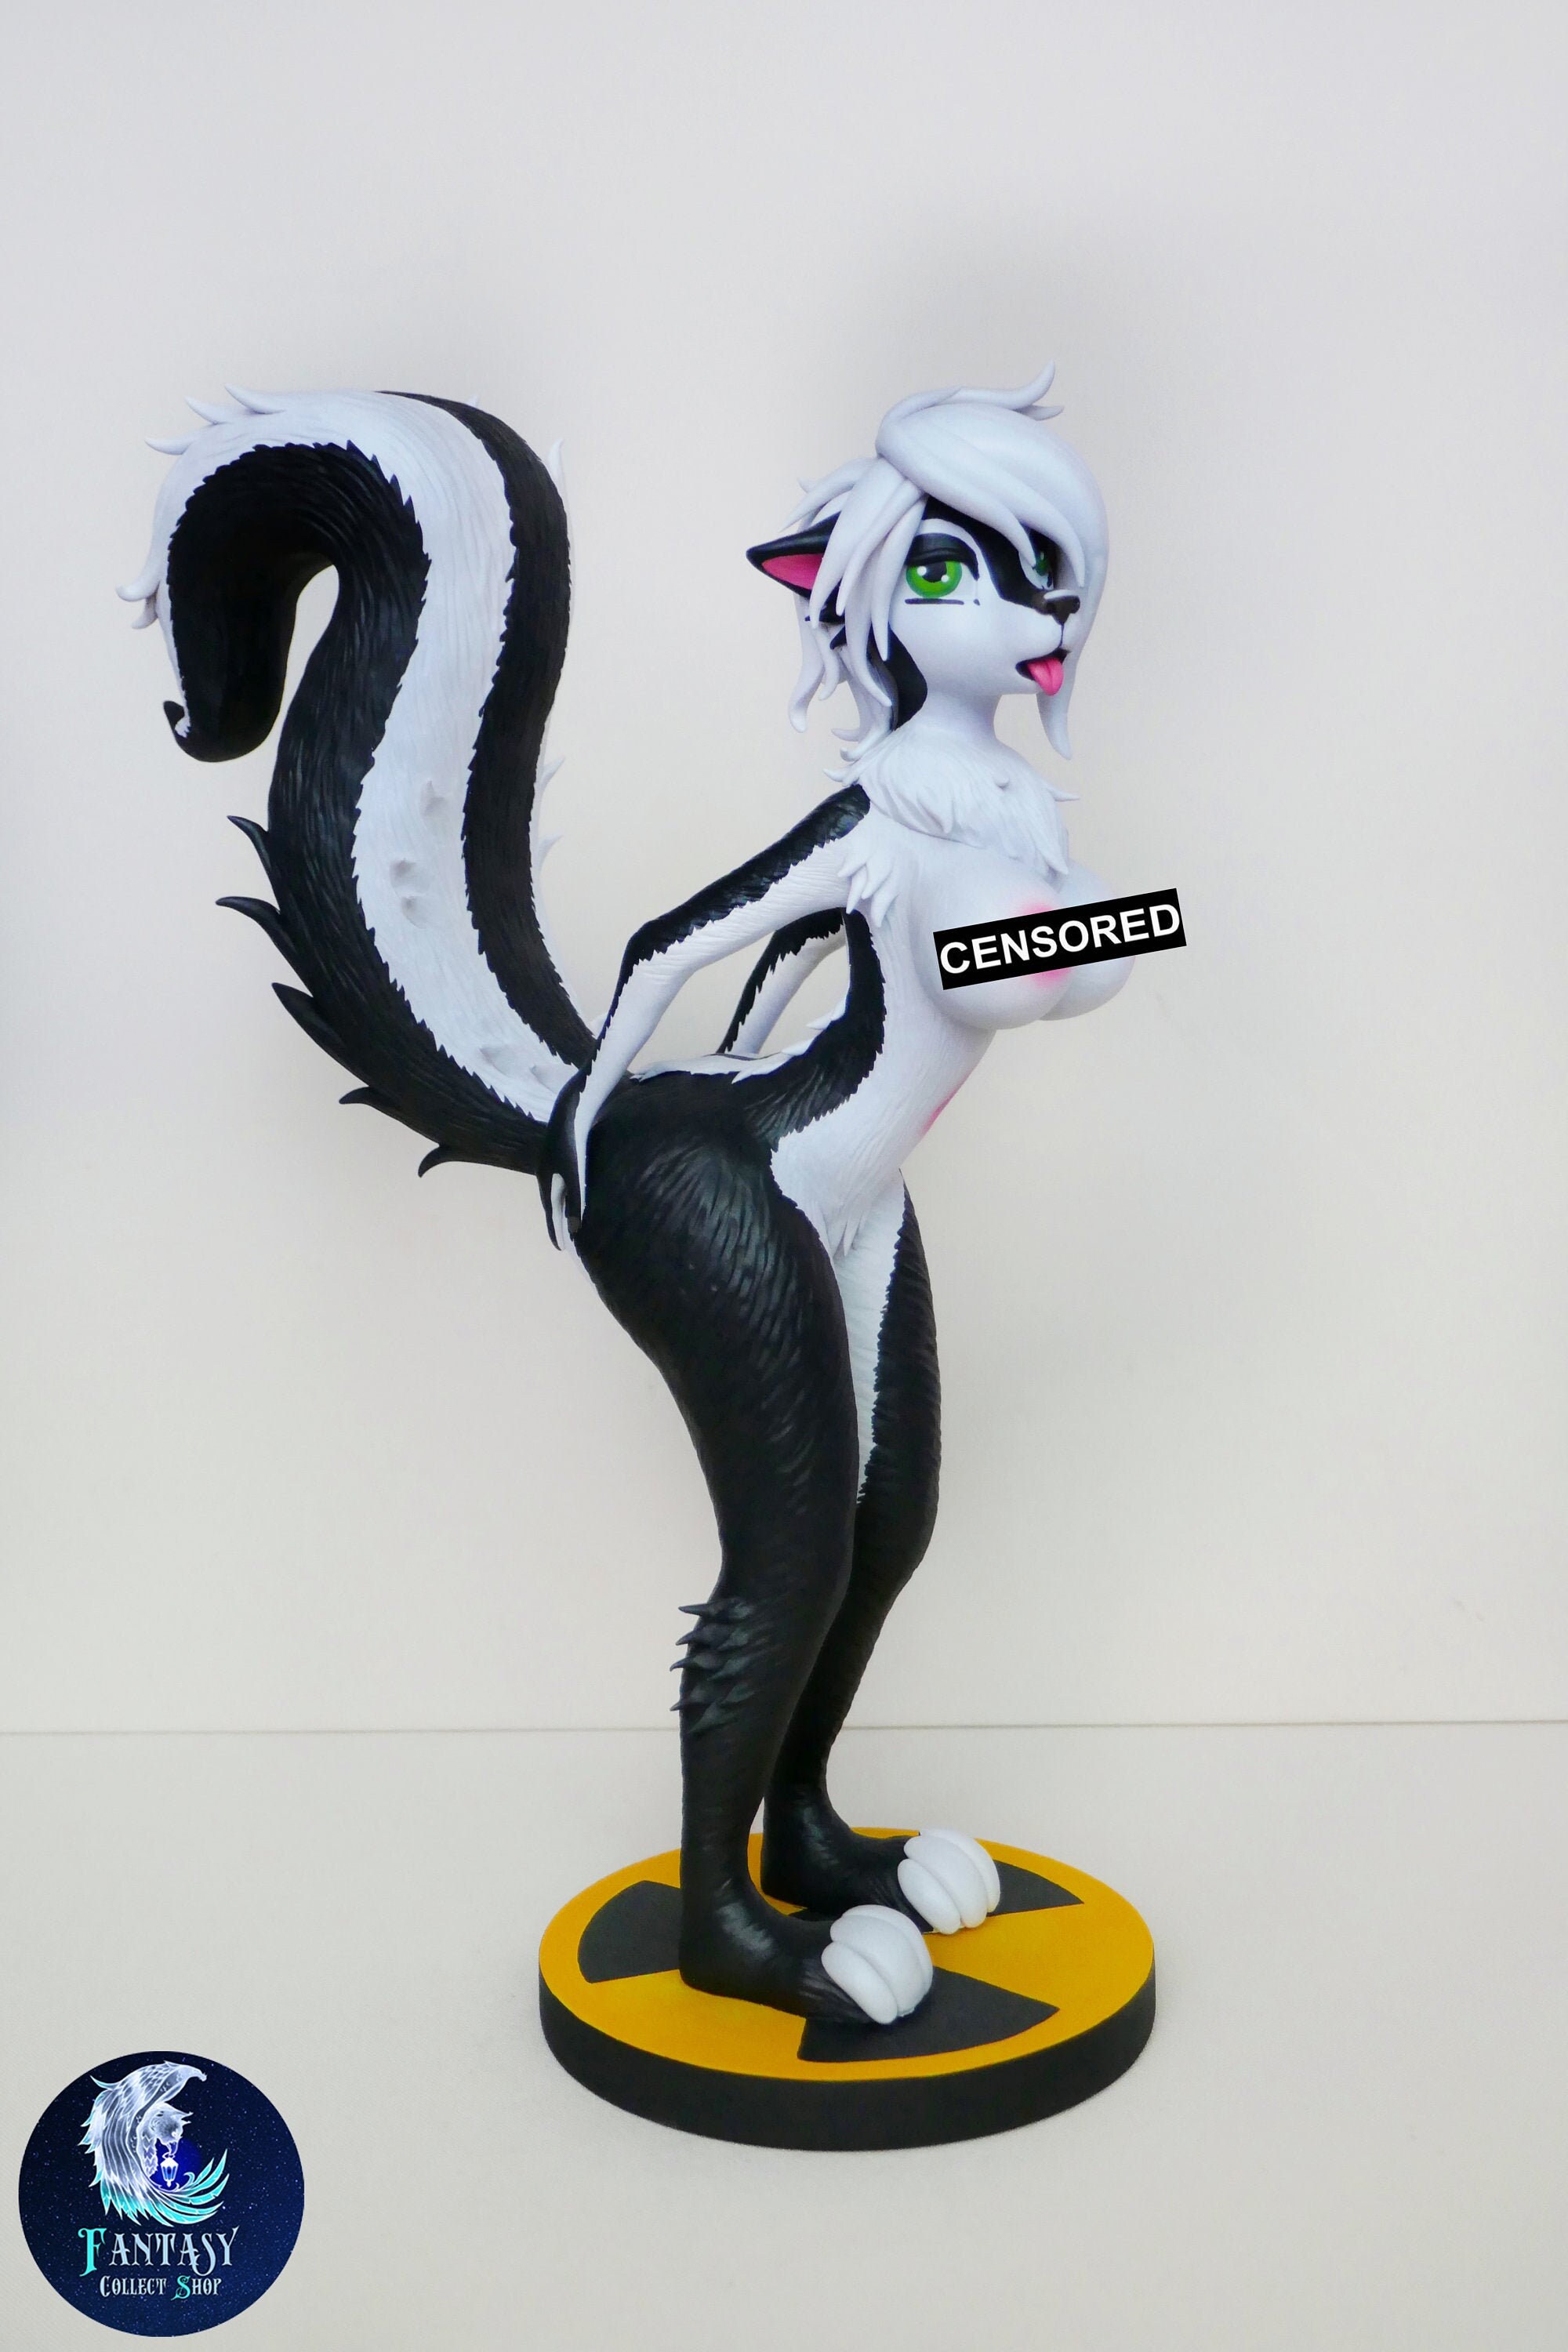 3 inch 50/'s style furry skunk figurine shabby chic black and white